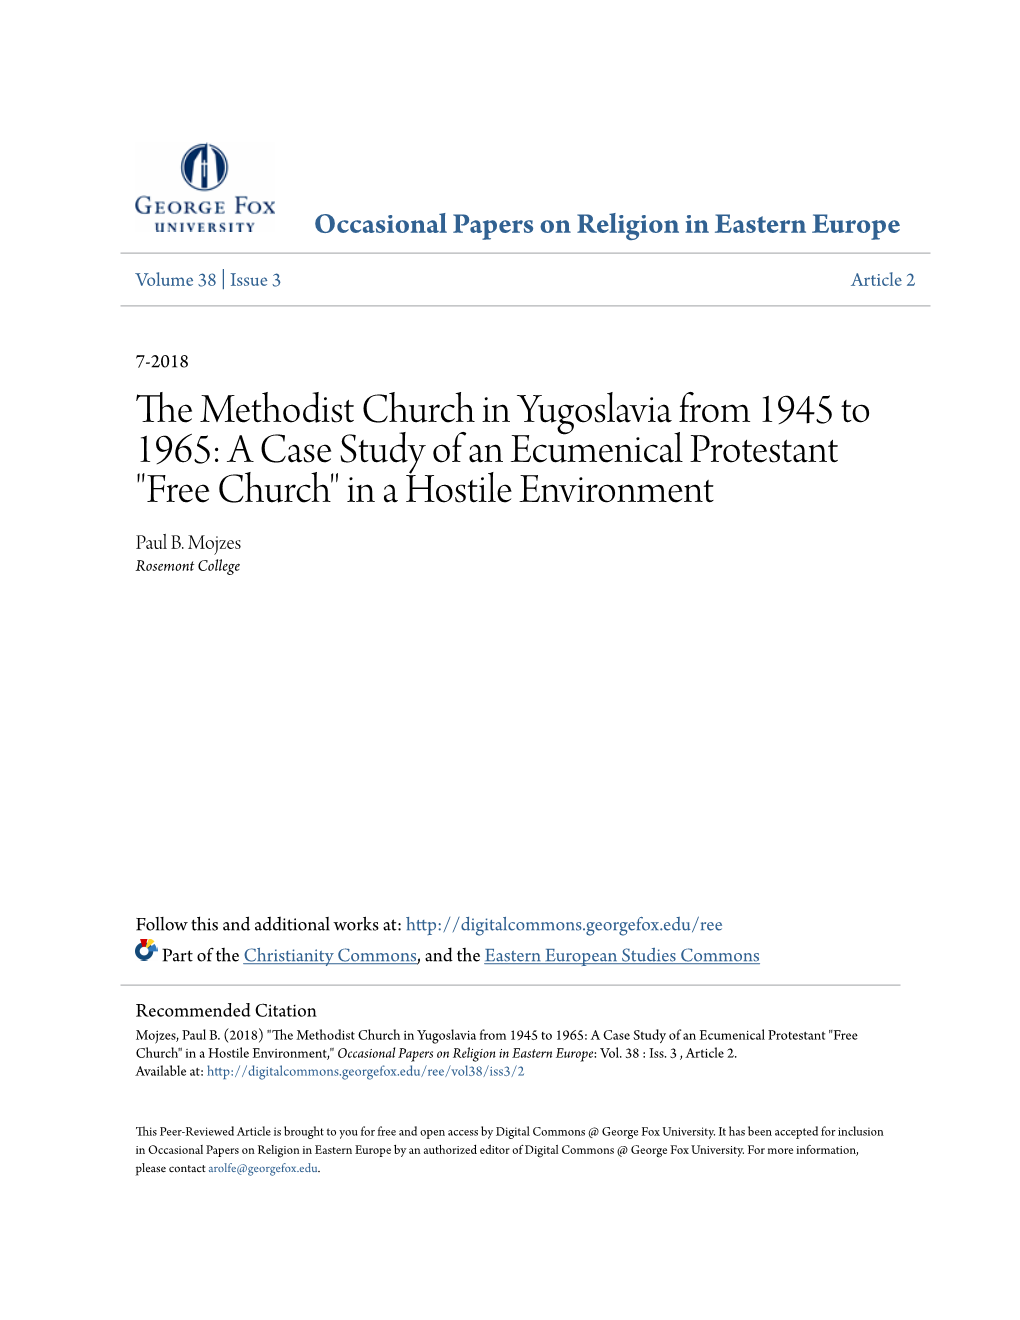 The Methodist Church in Yugoslavia from 1945 to 1965: a Case